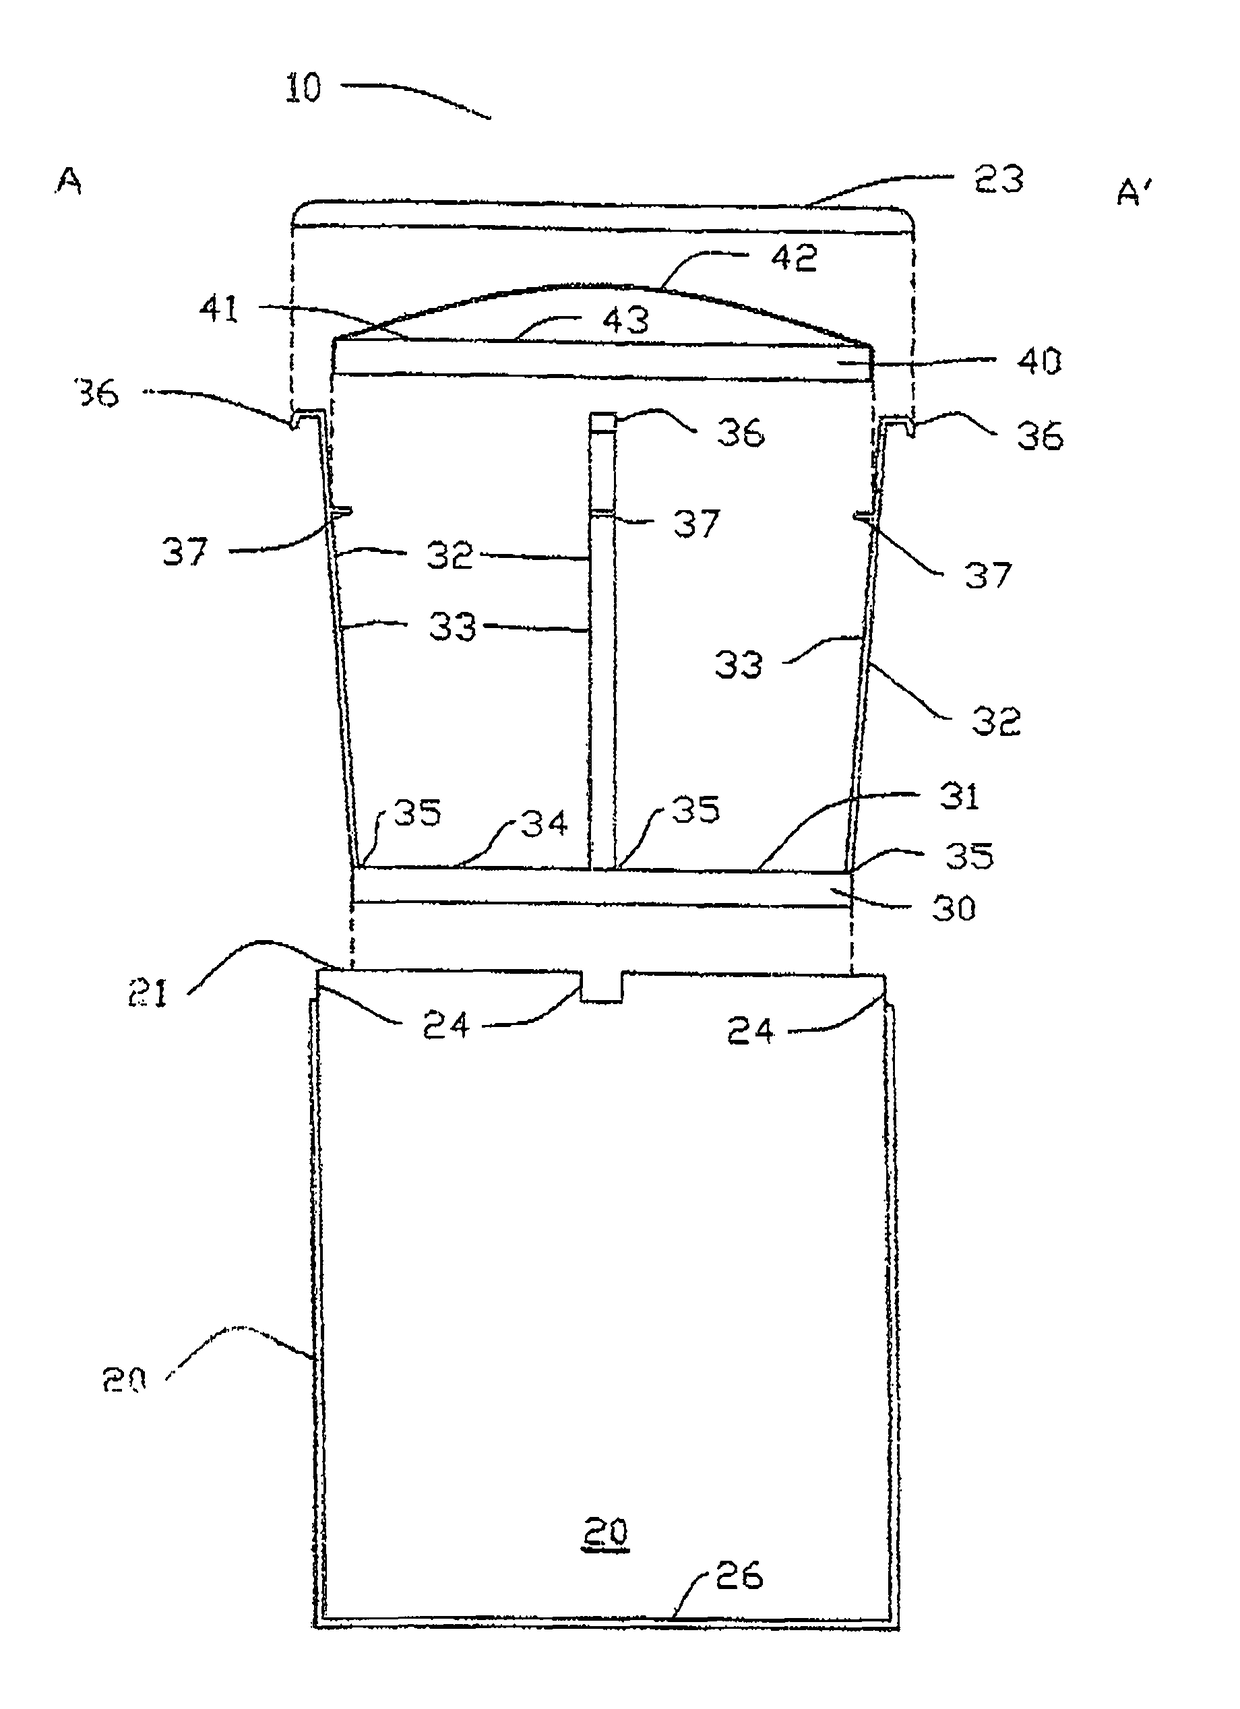 Portable prospecting and classifying self-contained apparatus